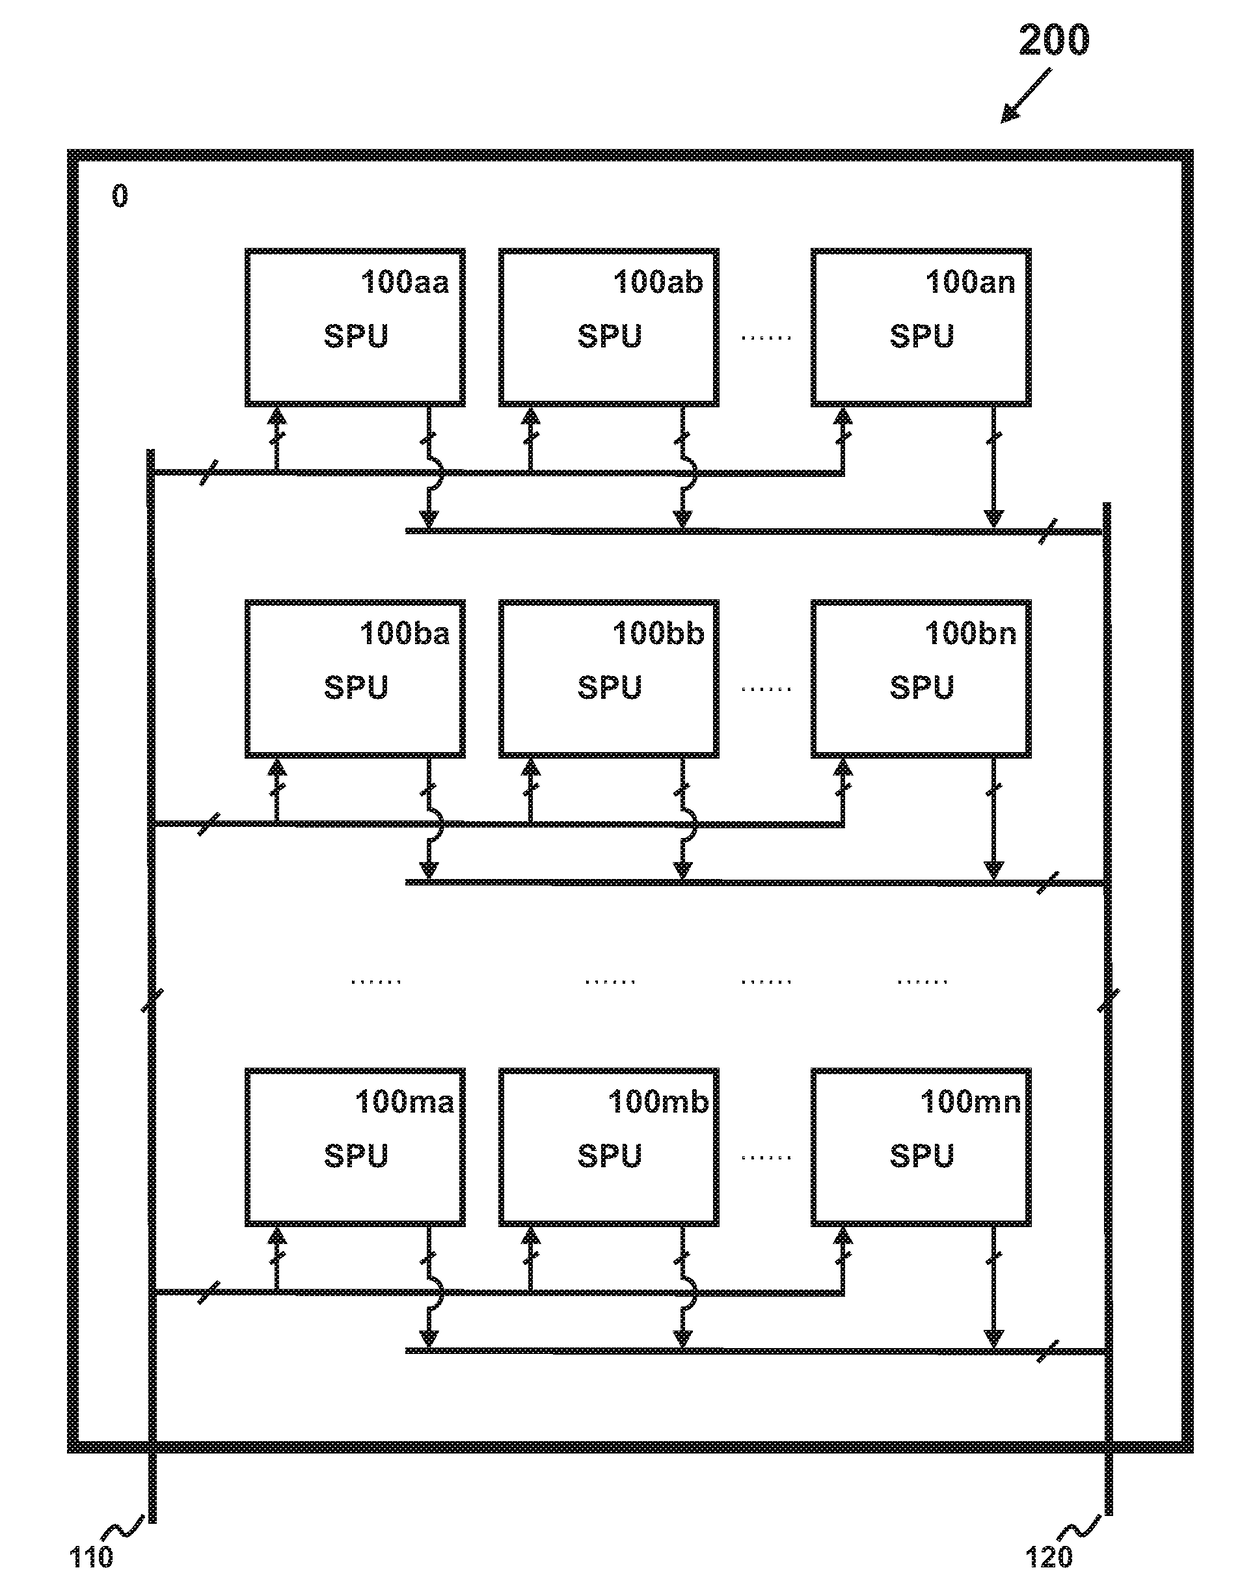 Distributed Pattern Storage-Processing Circuit Comprising Three-Dimensional Memory Arrays